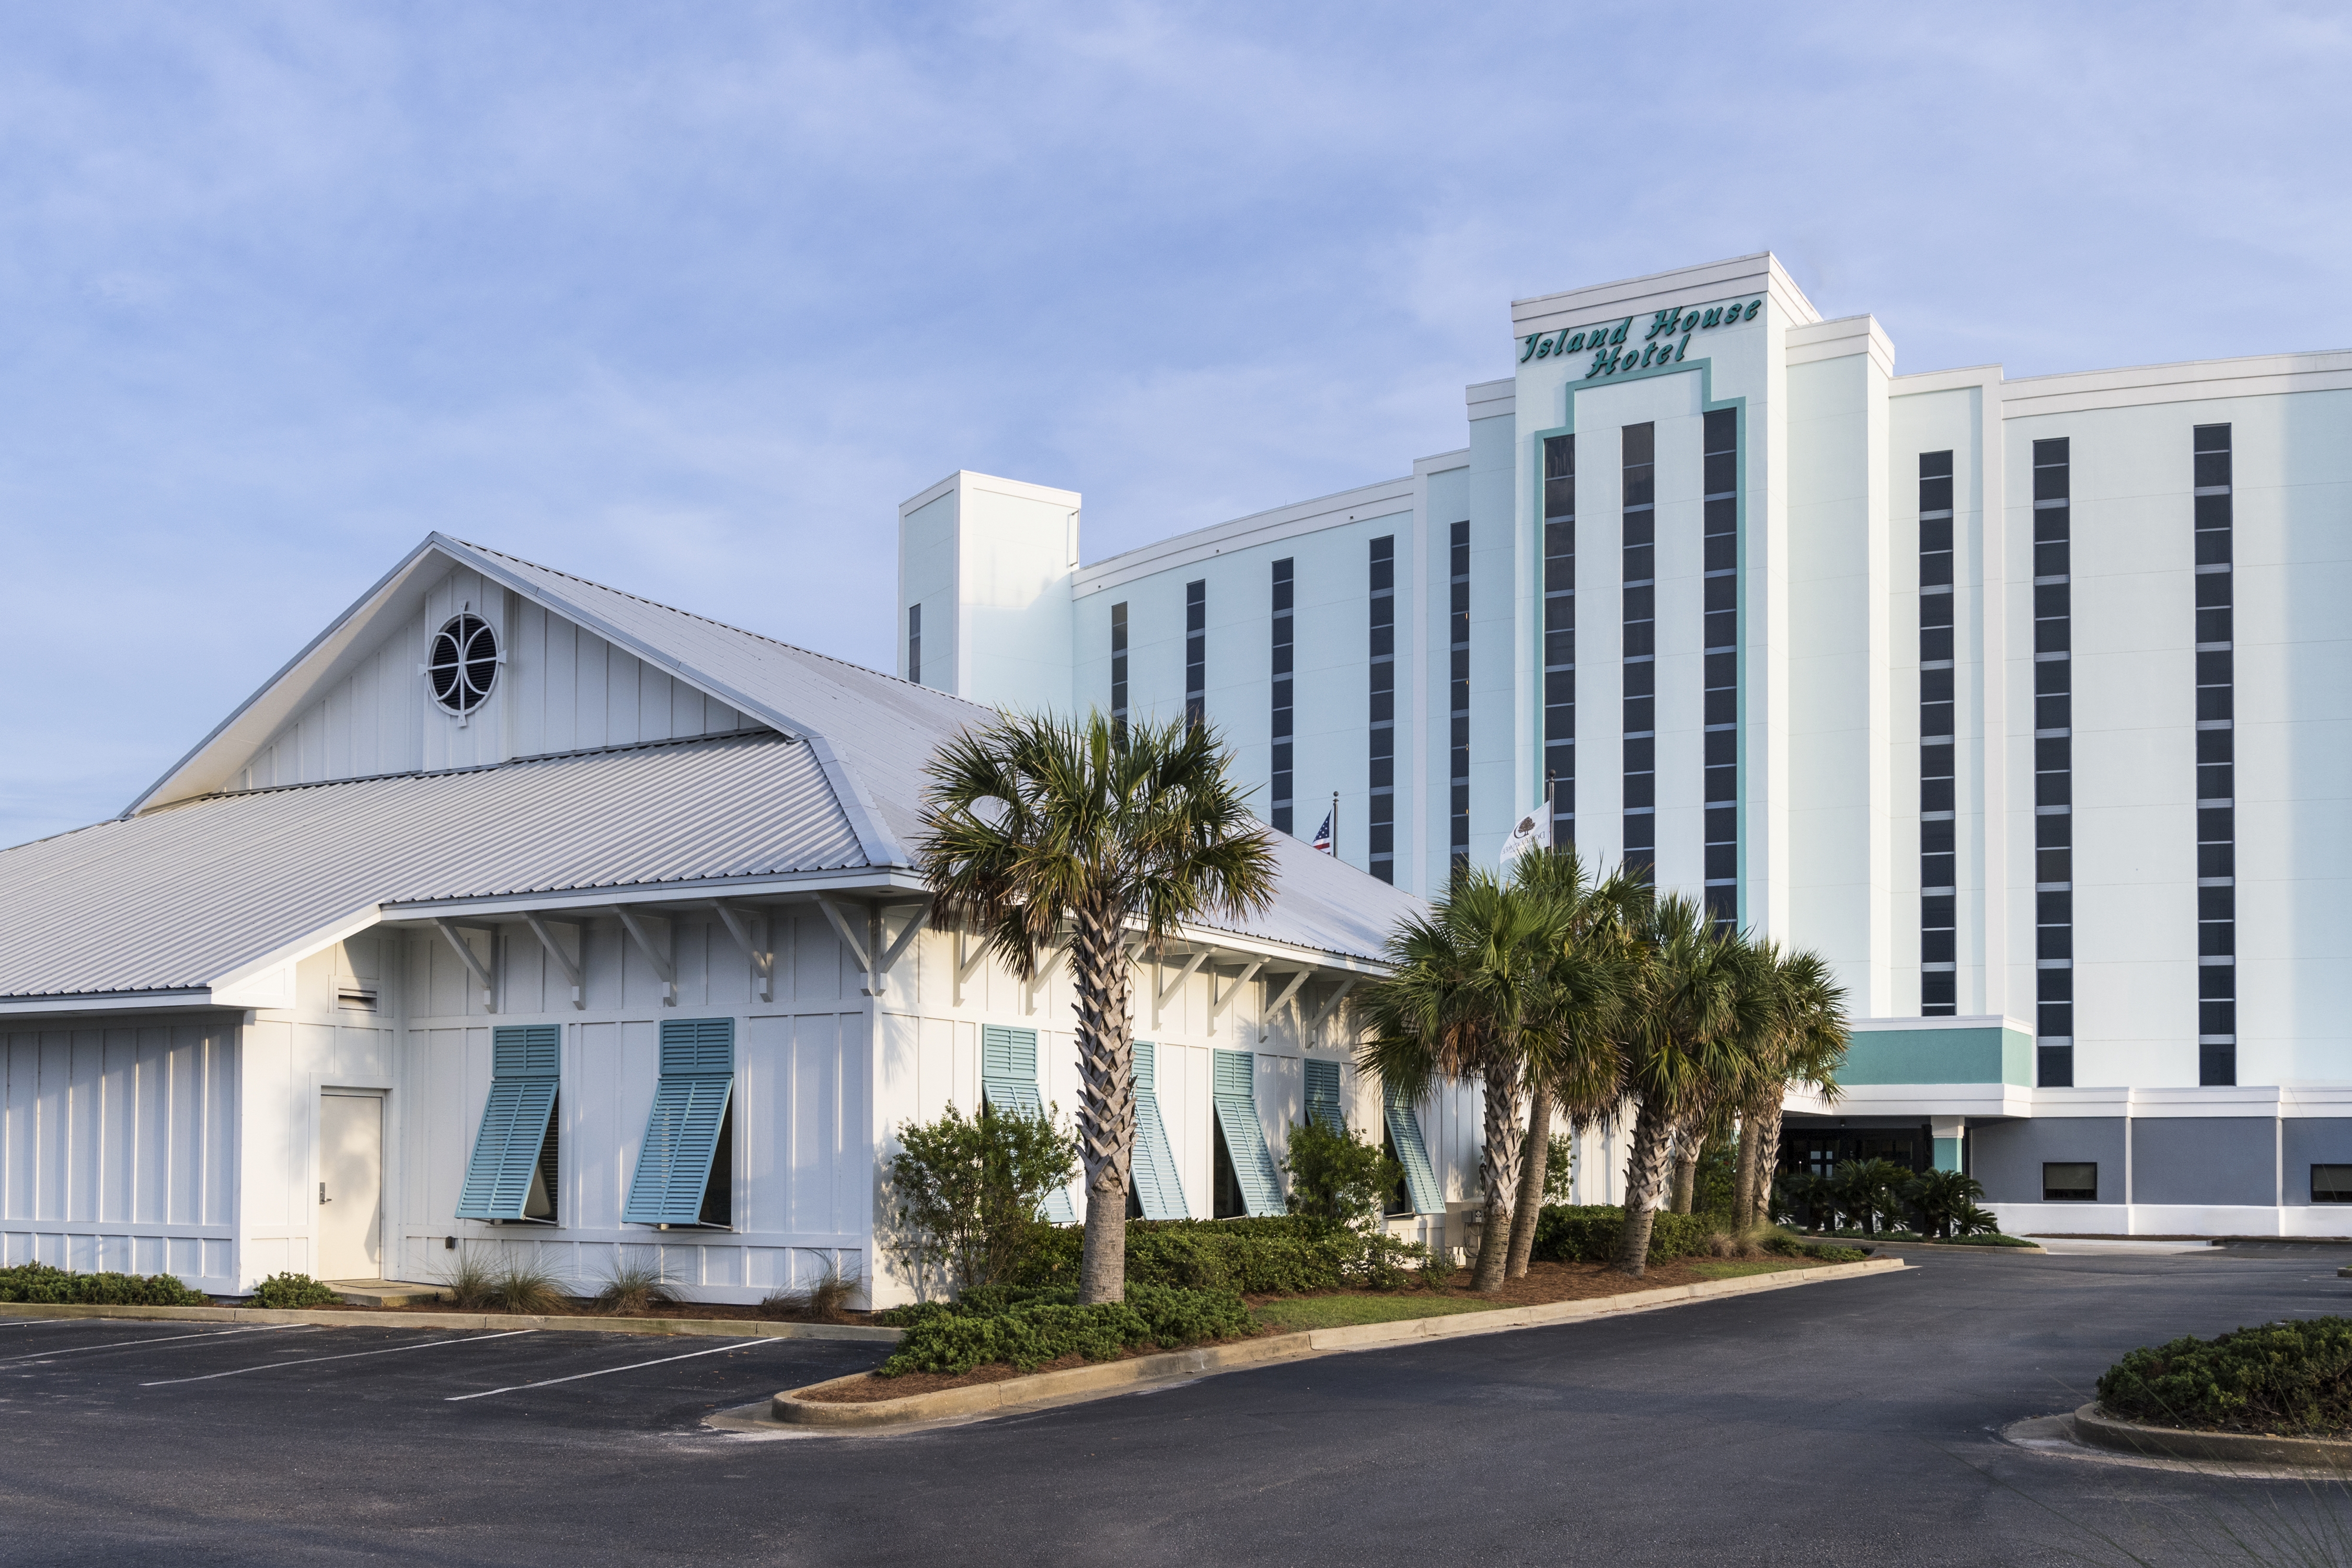 Daytime View of Ballroom Exterior Surrounded by Palm Trees and Hotel Exterior with Signage